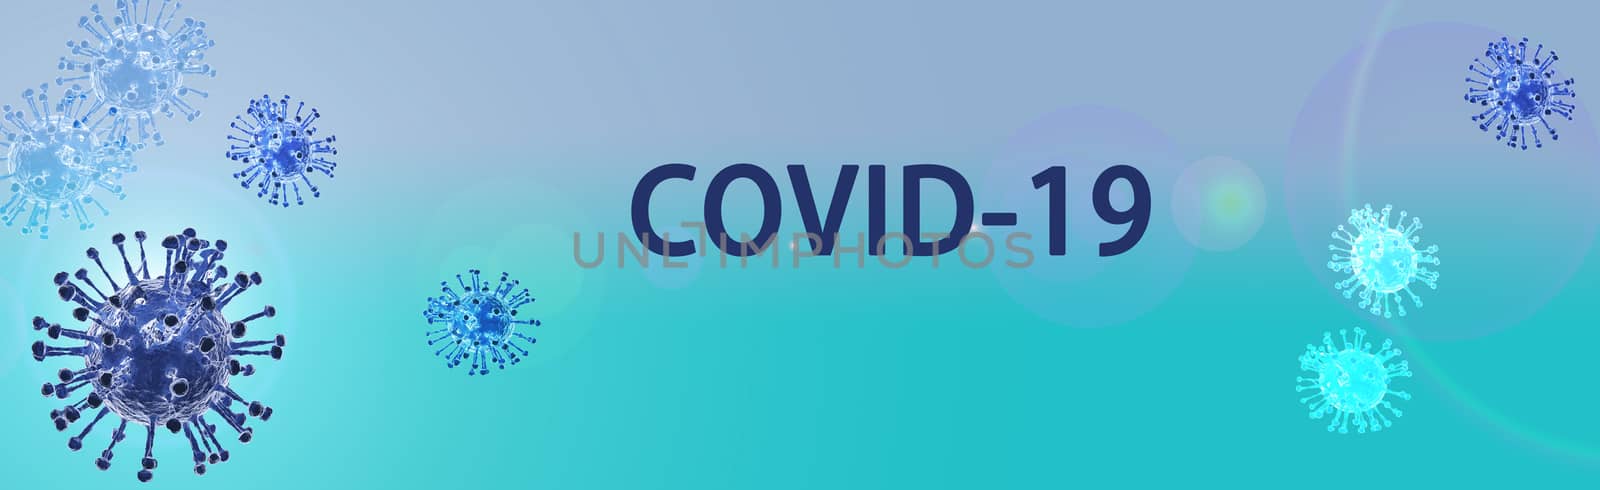 banner covid virus blue style by pickaalo